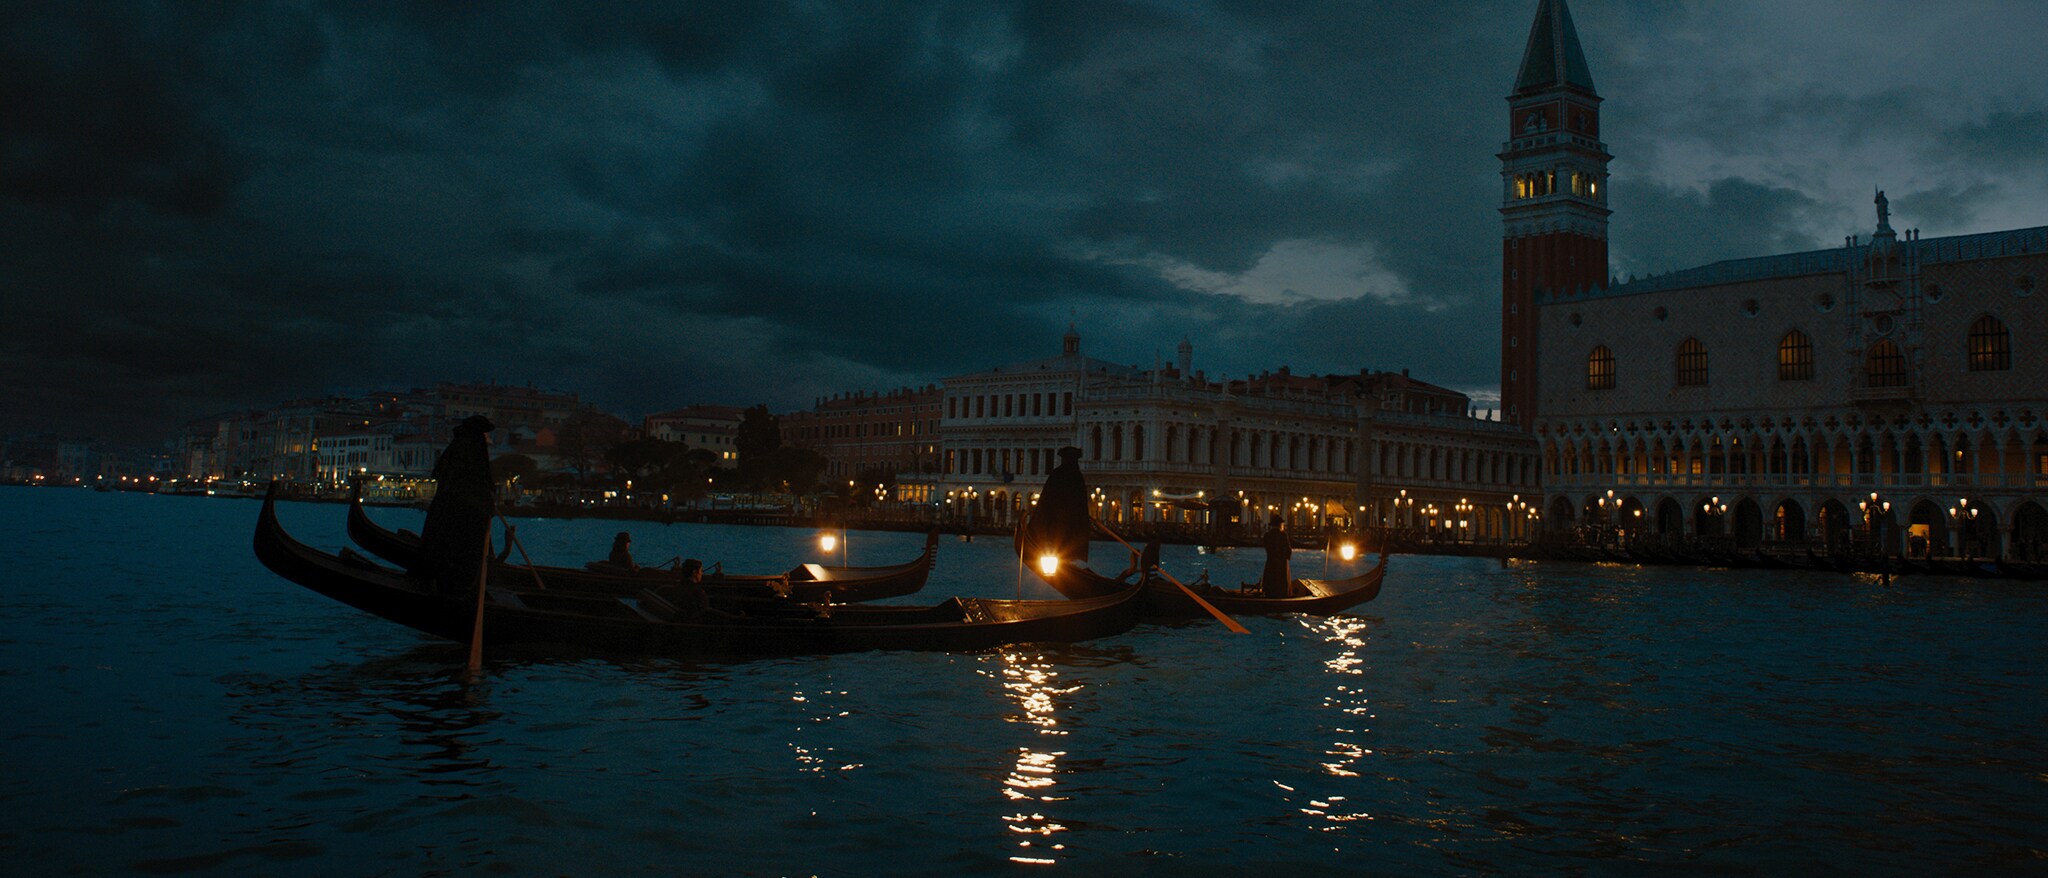 Homepage Hero - A Haunting in Venice